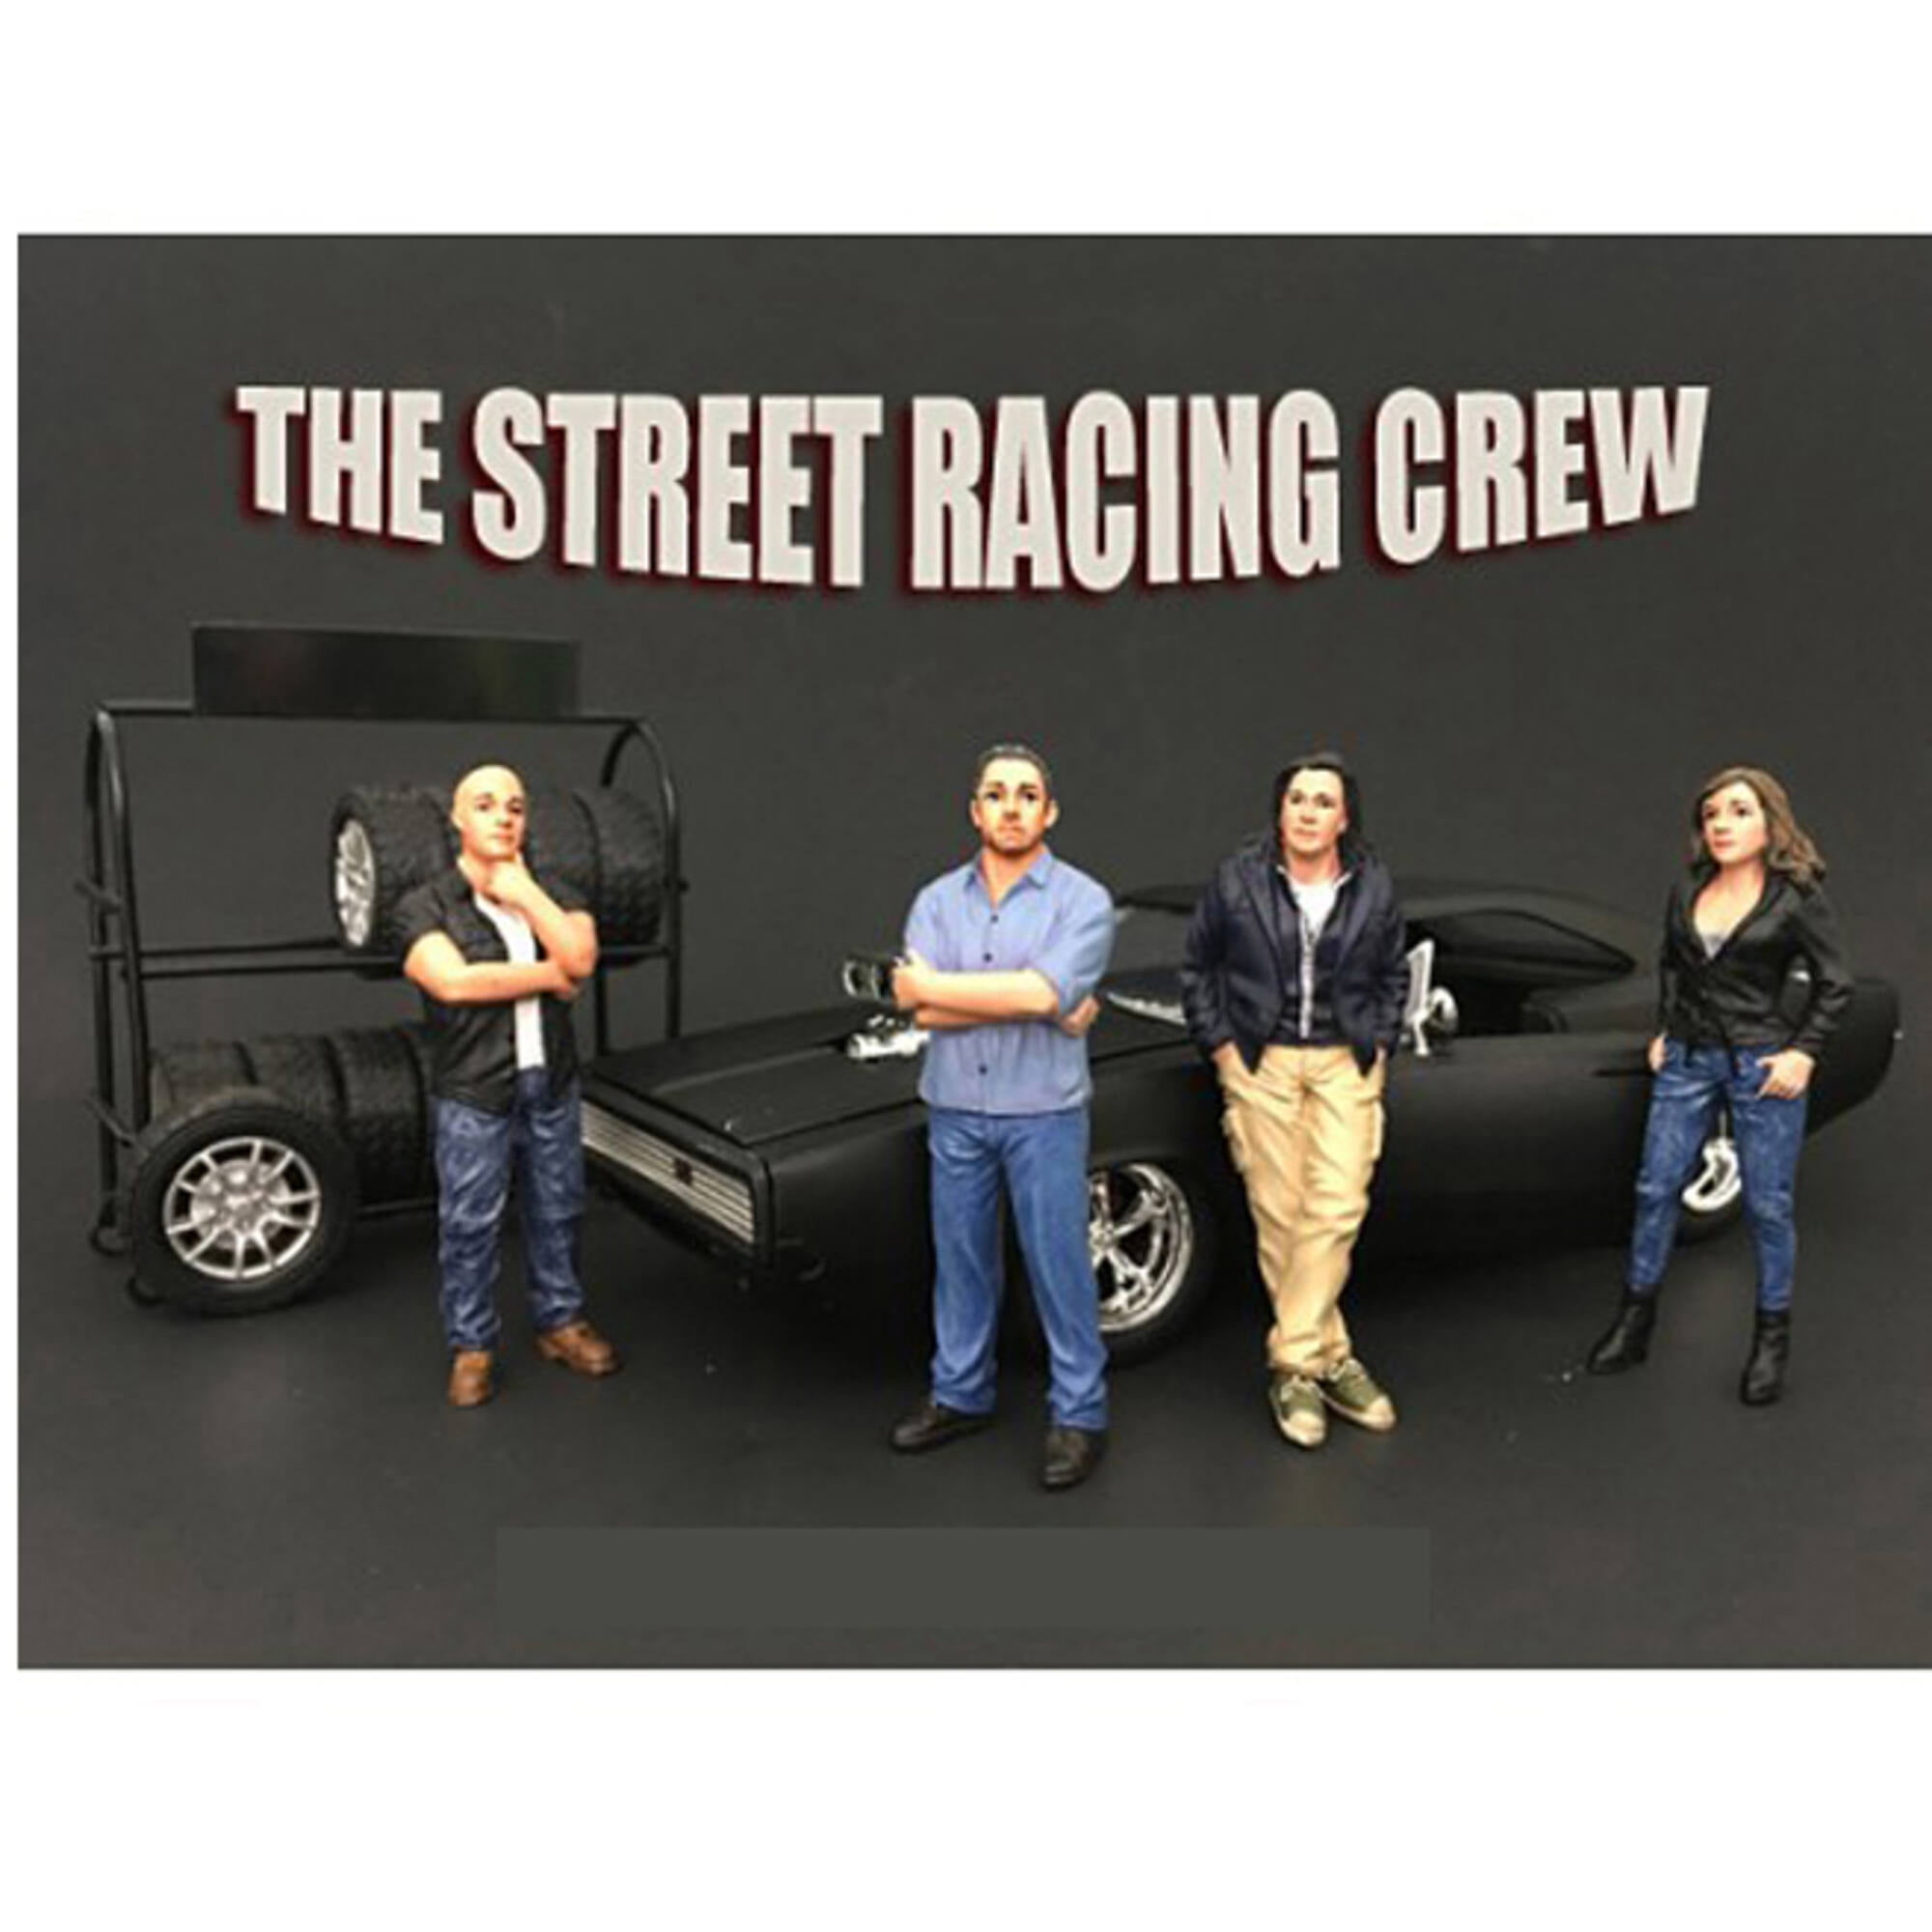 77431-77432-77433-77434 The Street Racing Crew 4 Piece Figure Set For 1-18 Scale Models